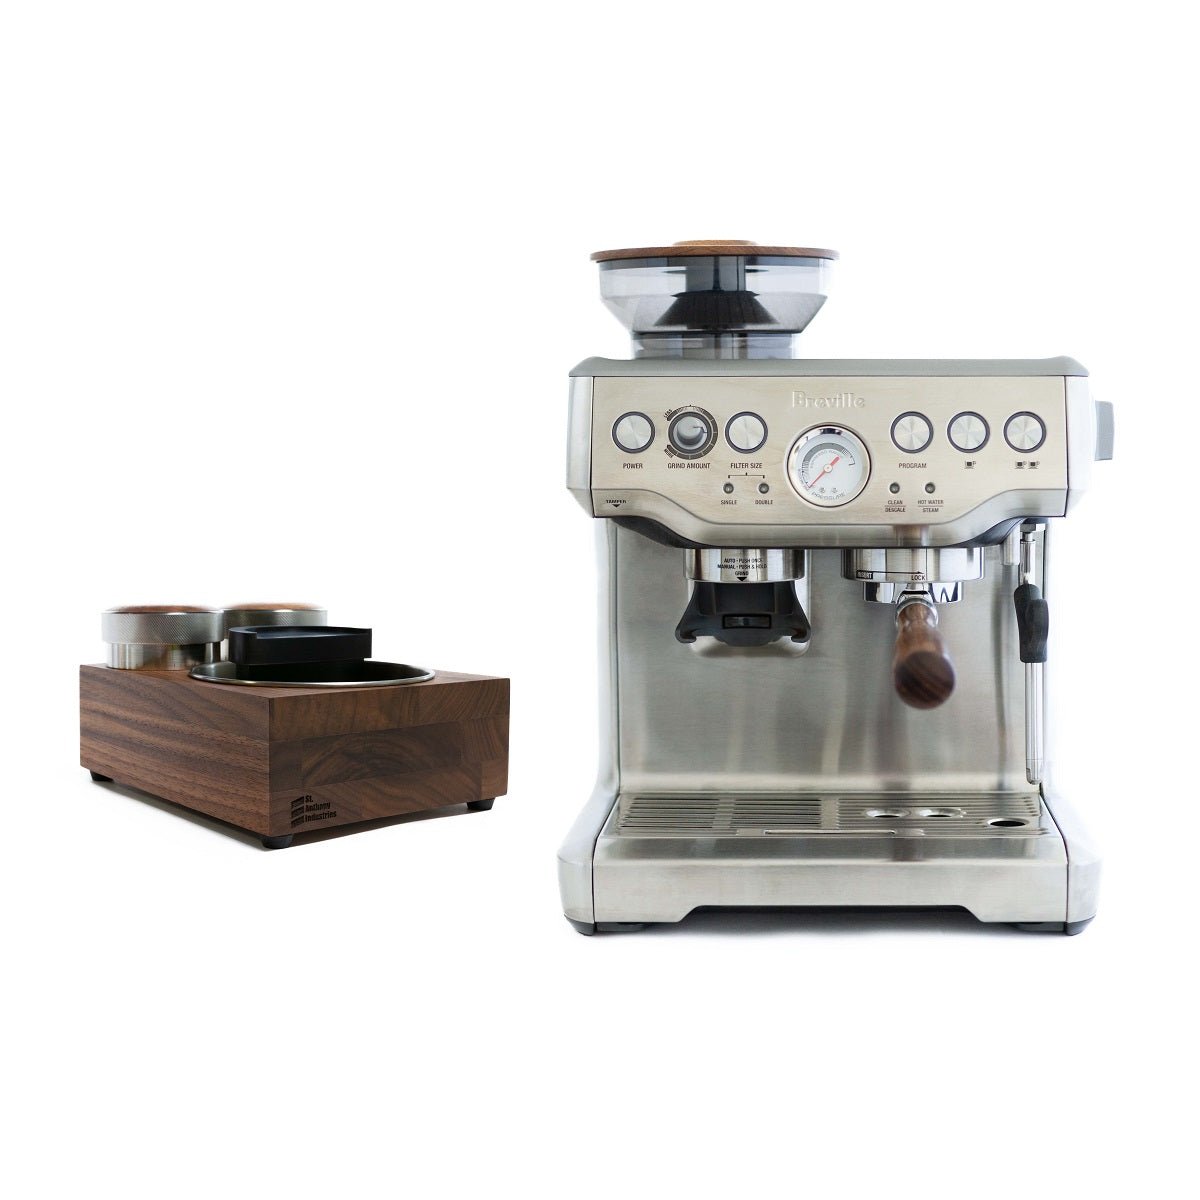 Breville Upgrade Kit Deluxe - Saint Anthony Industries